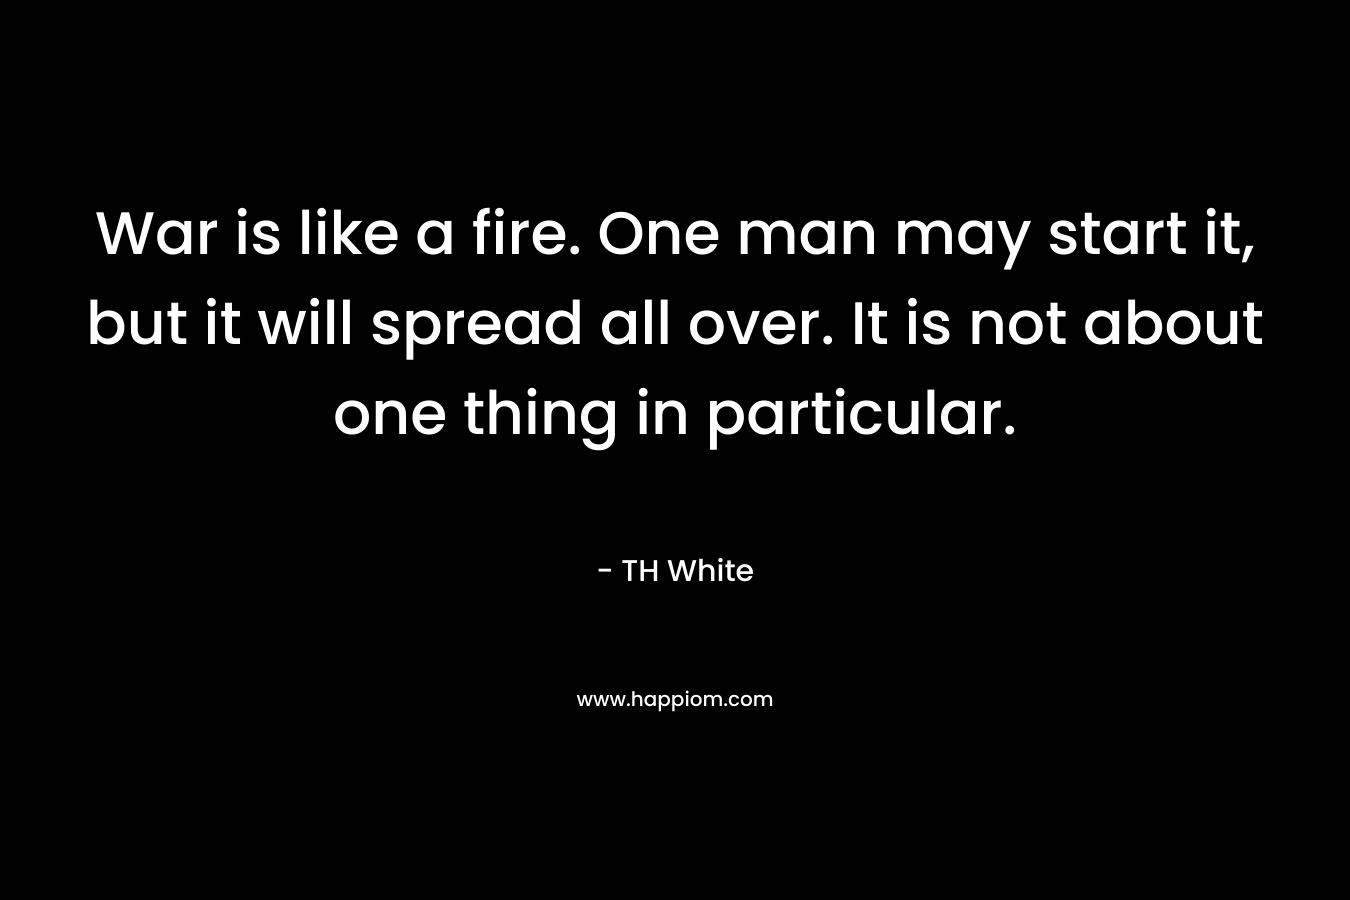 War is like a fire. One man may start it, but it will spread all over. It is not about one thing in particular. – TH White